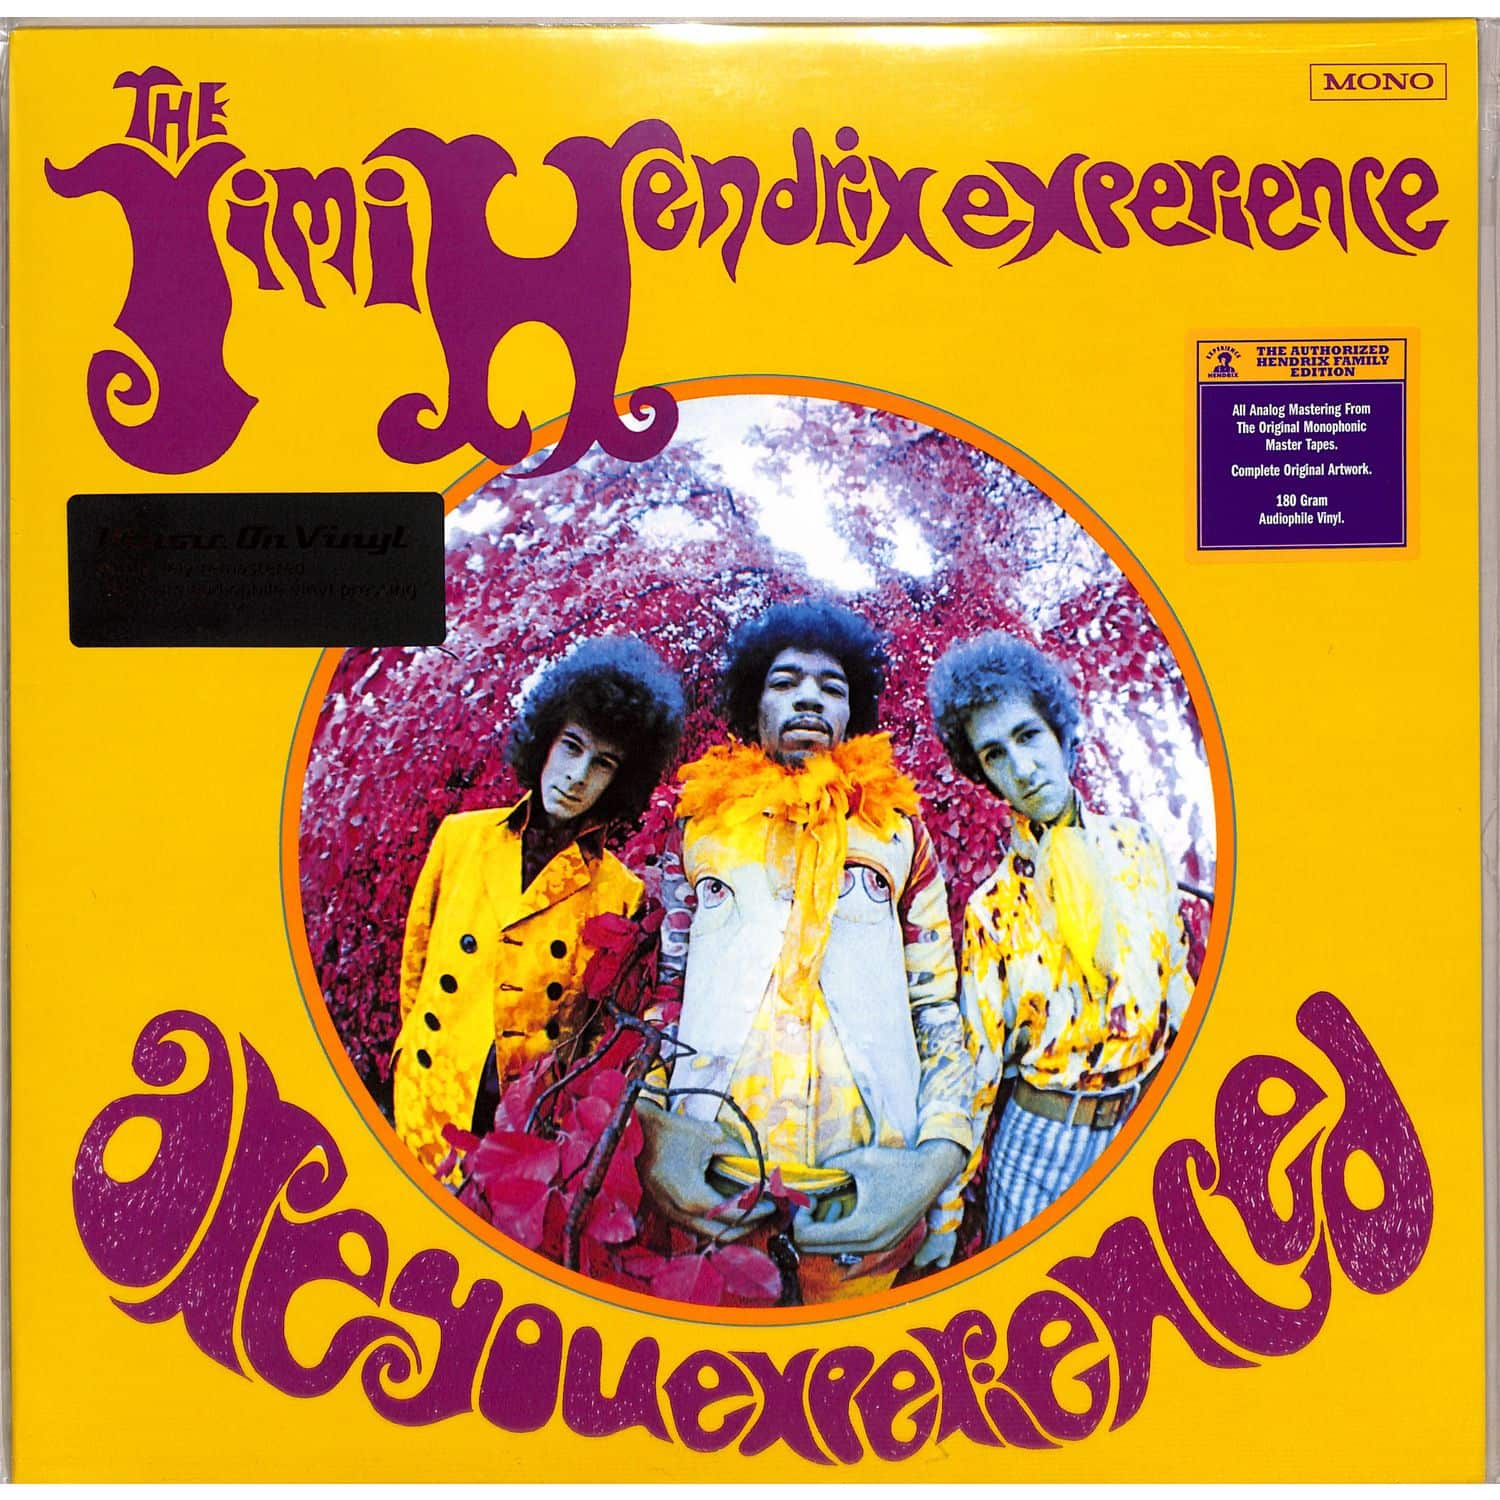 Jimi Hendrix Experience - ARE YOU EXPERIENCED 